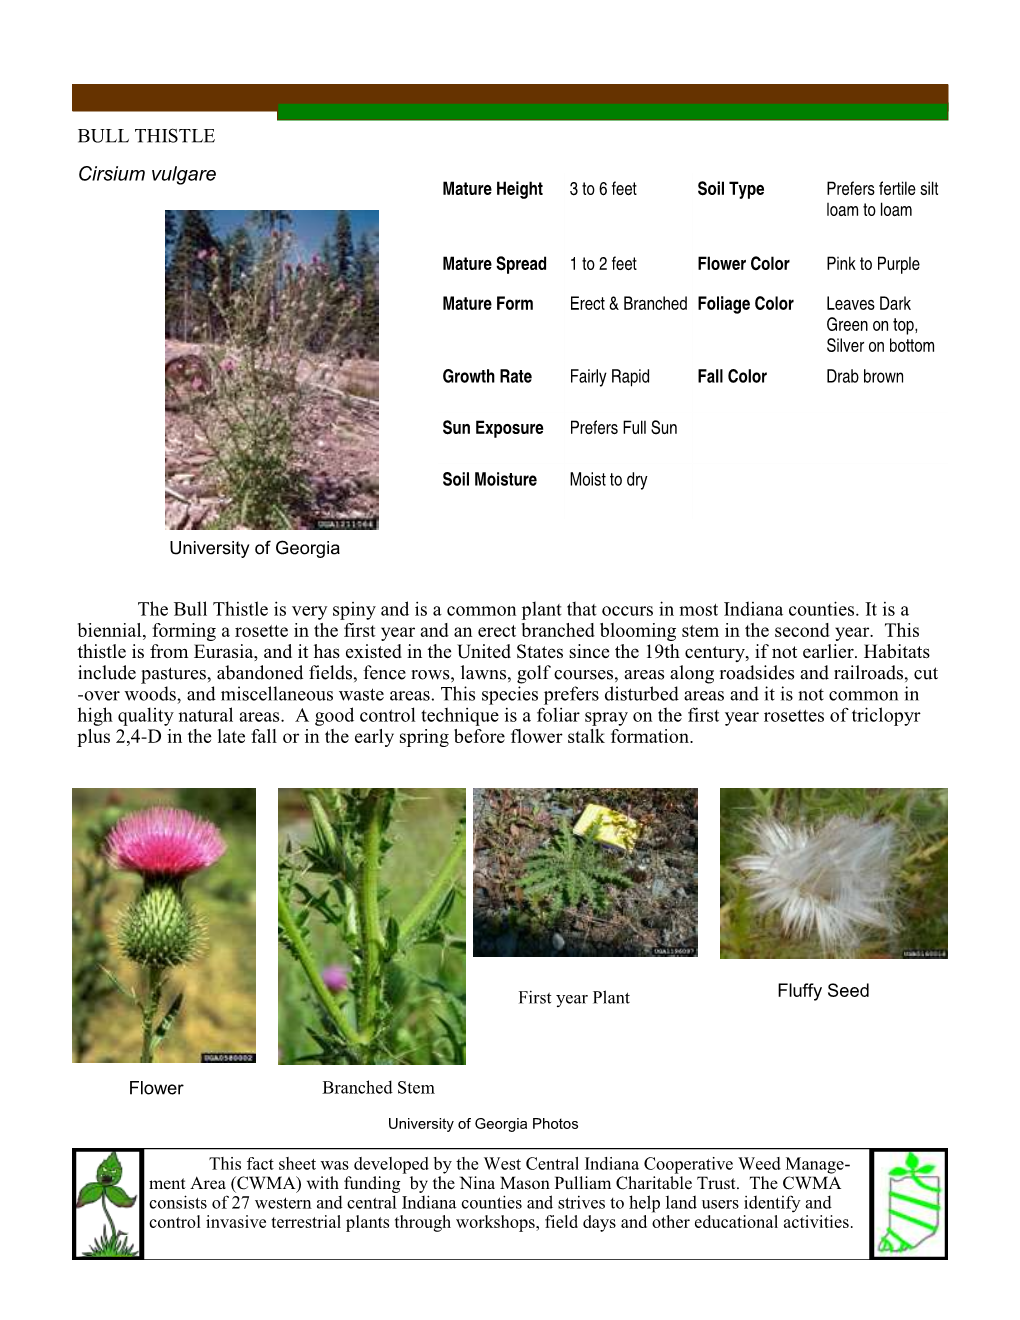 BULL THISTLE Cirsium Vulgare the Bull Thistle Is Very Spiny and Is A